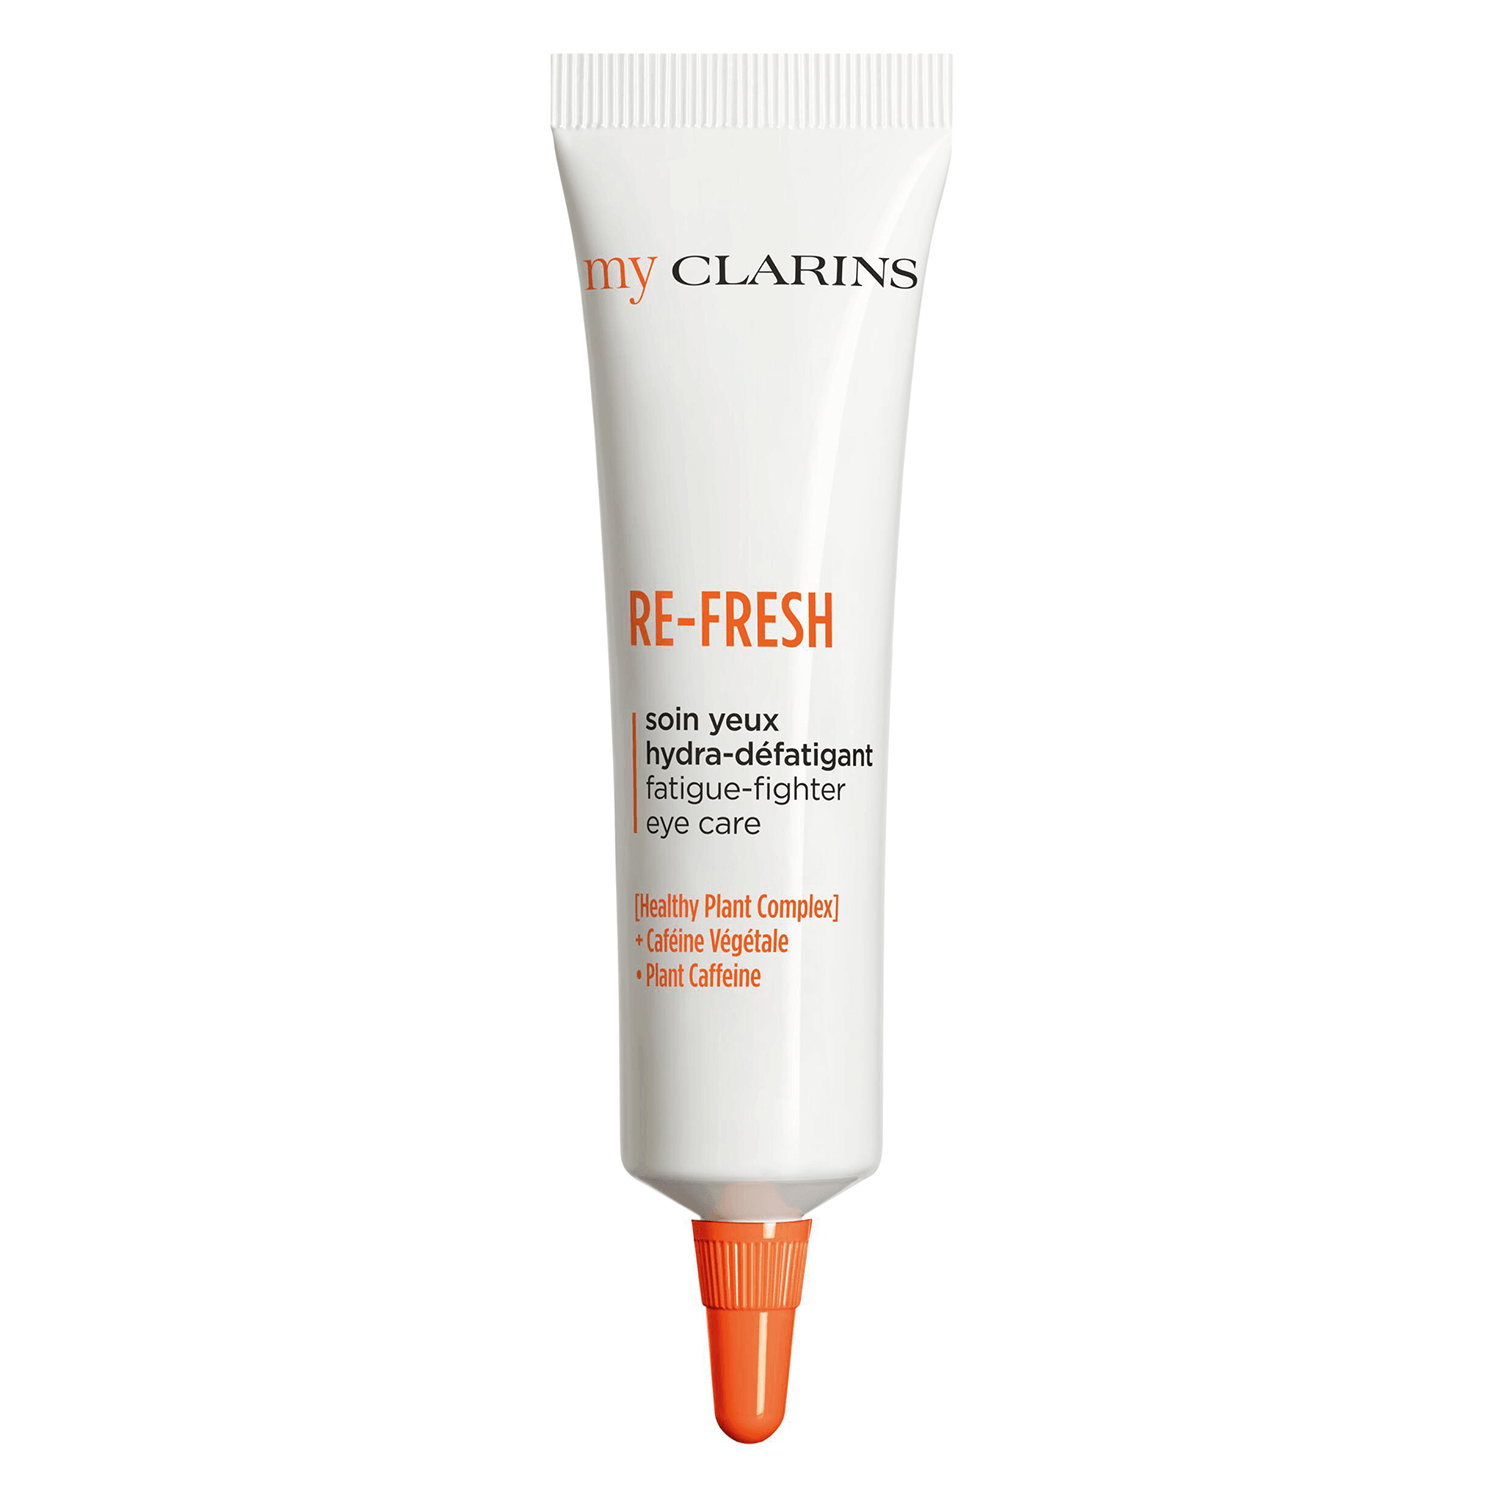 Product image from myClarins - RE-FRESH fatige-fighter eye care